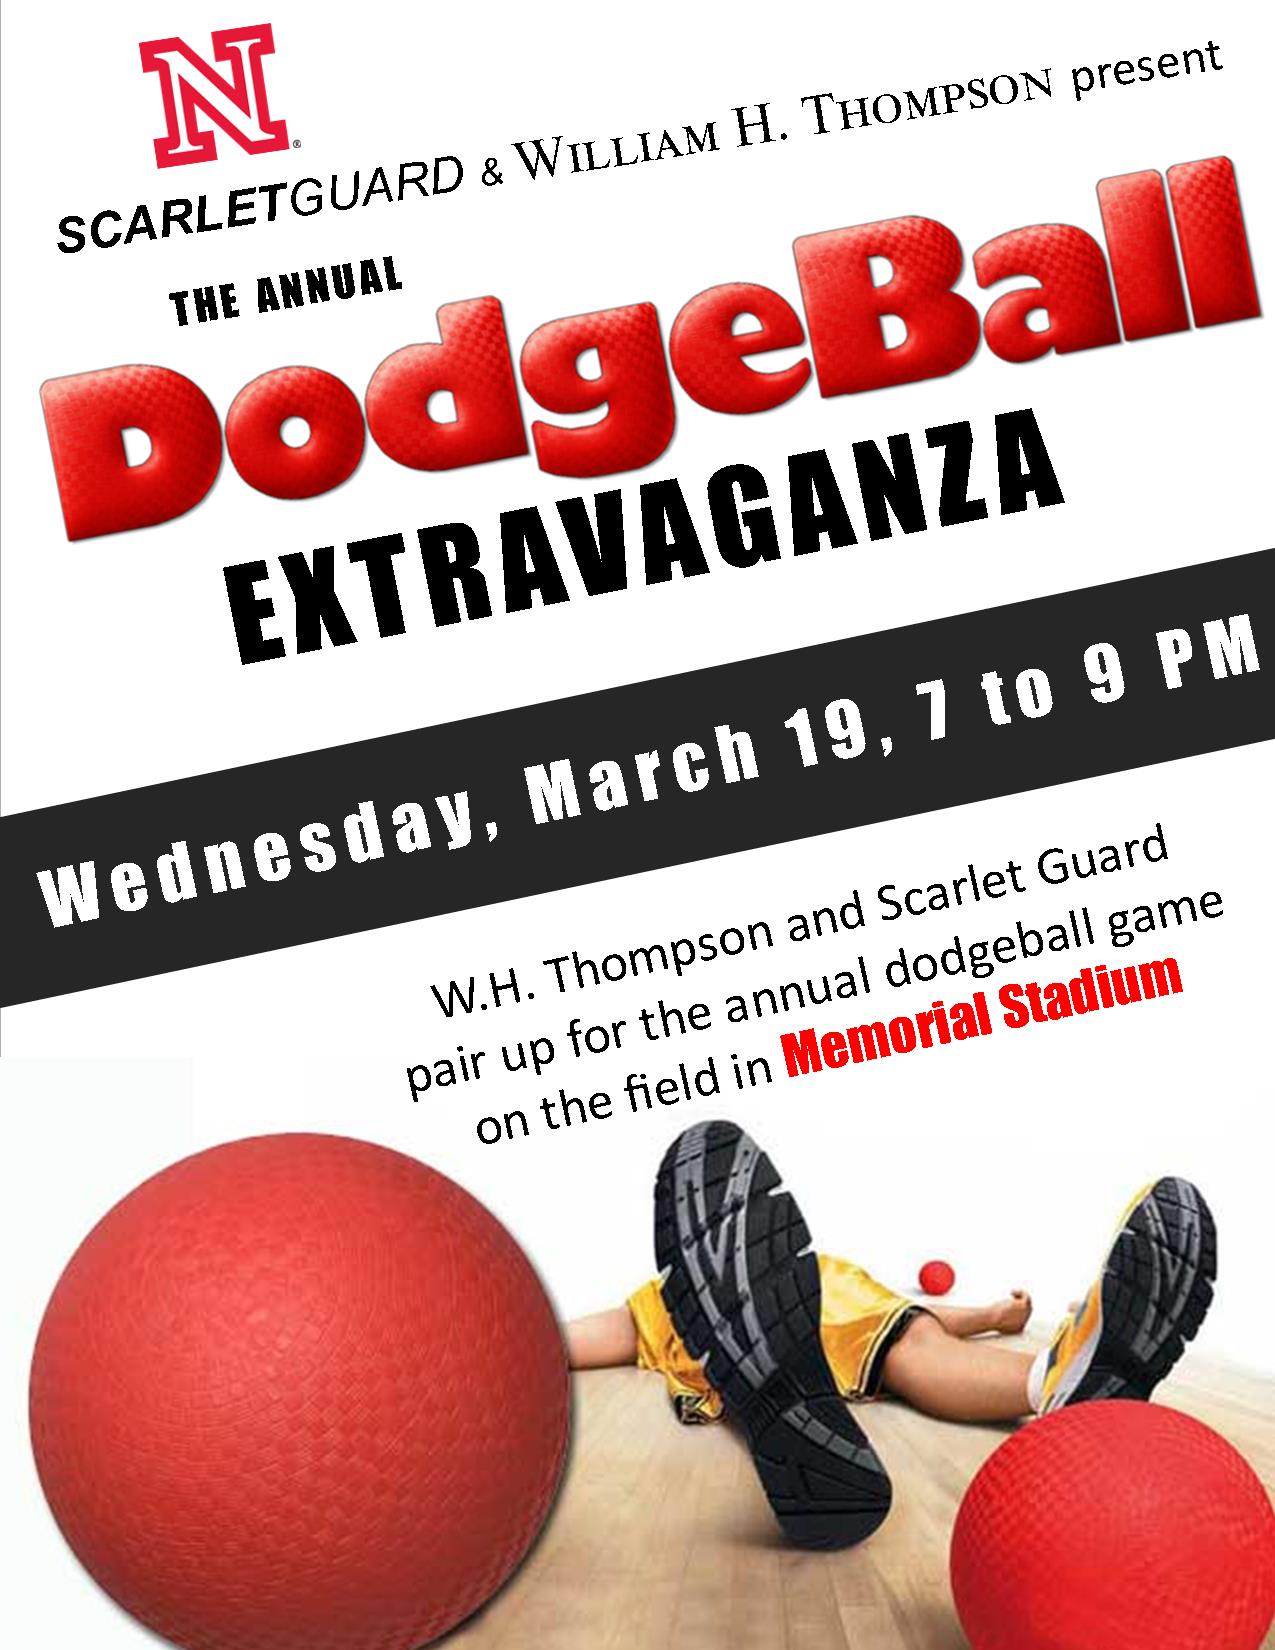 The Annual DodgeBall Extravaganza